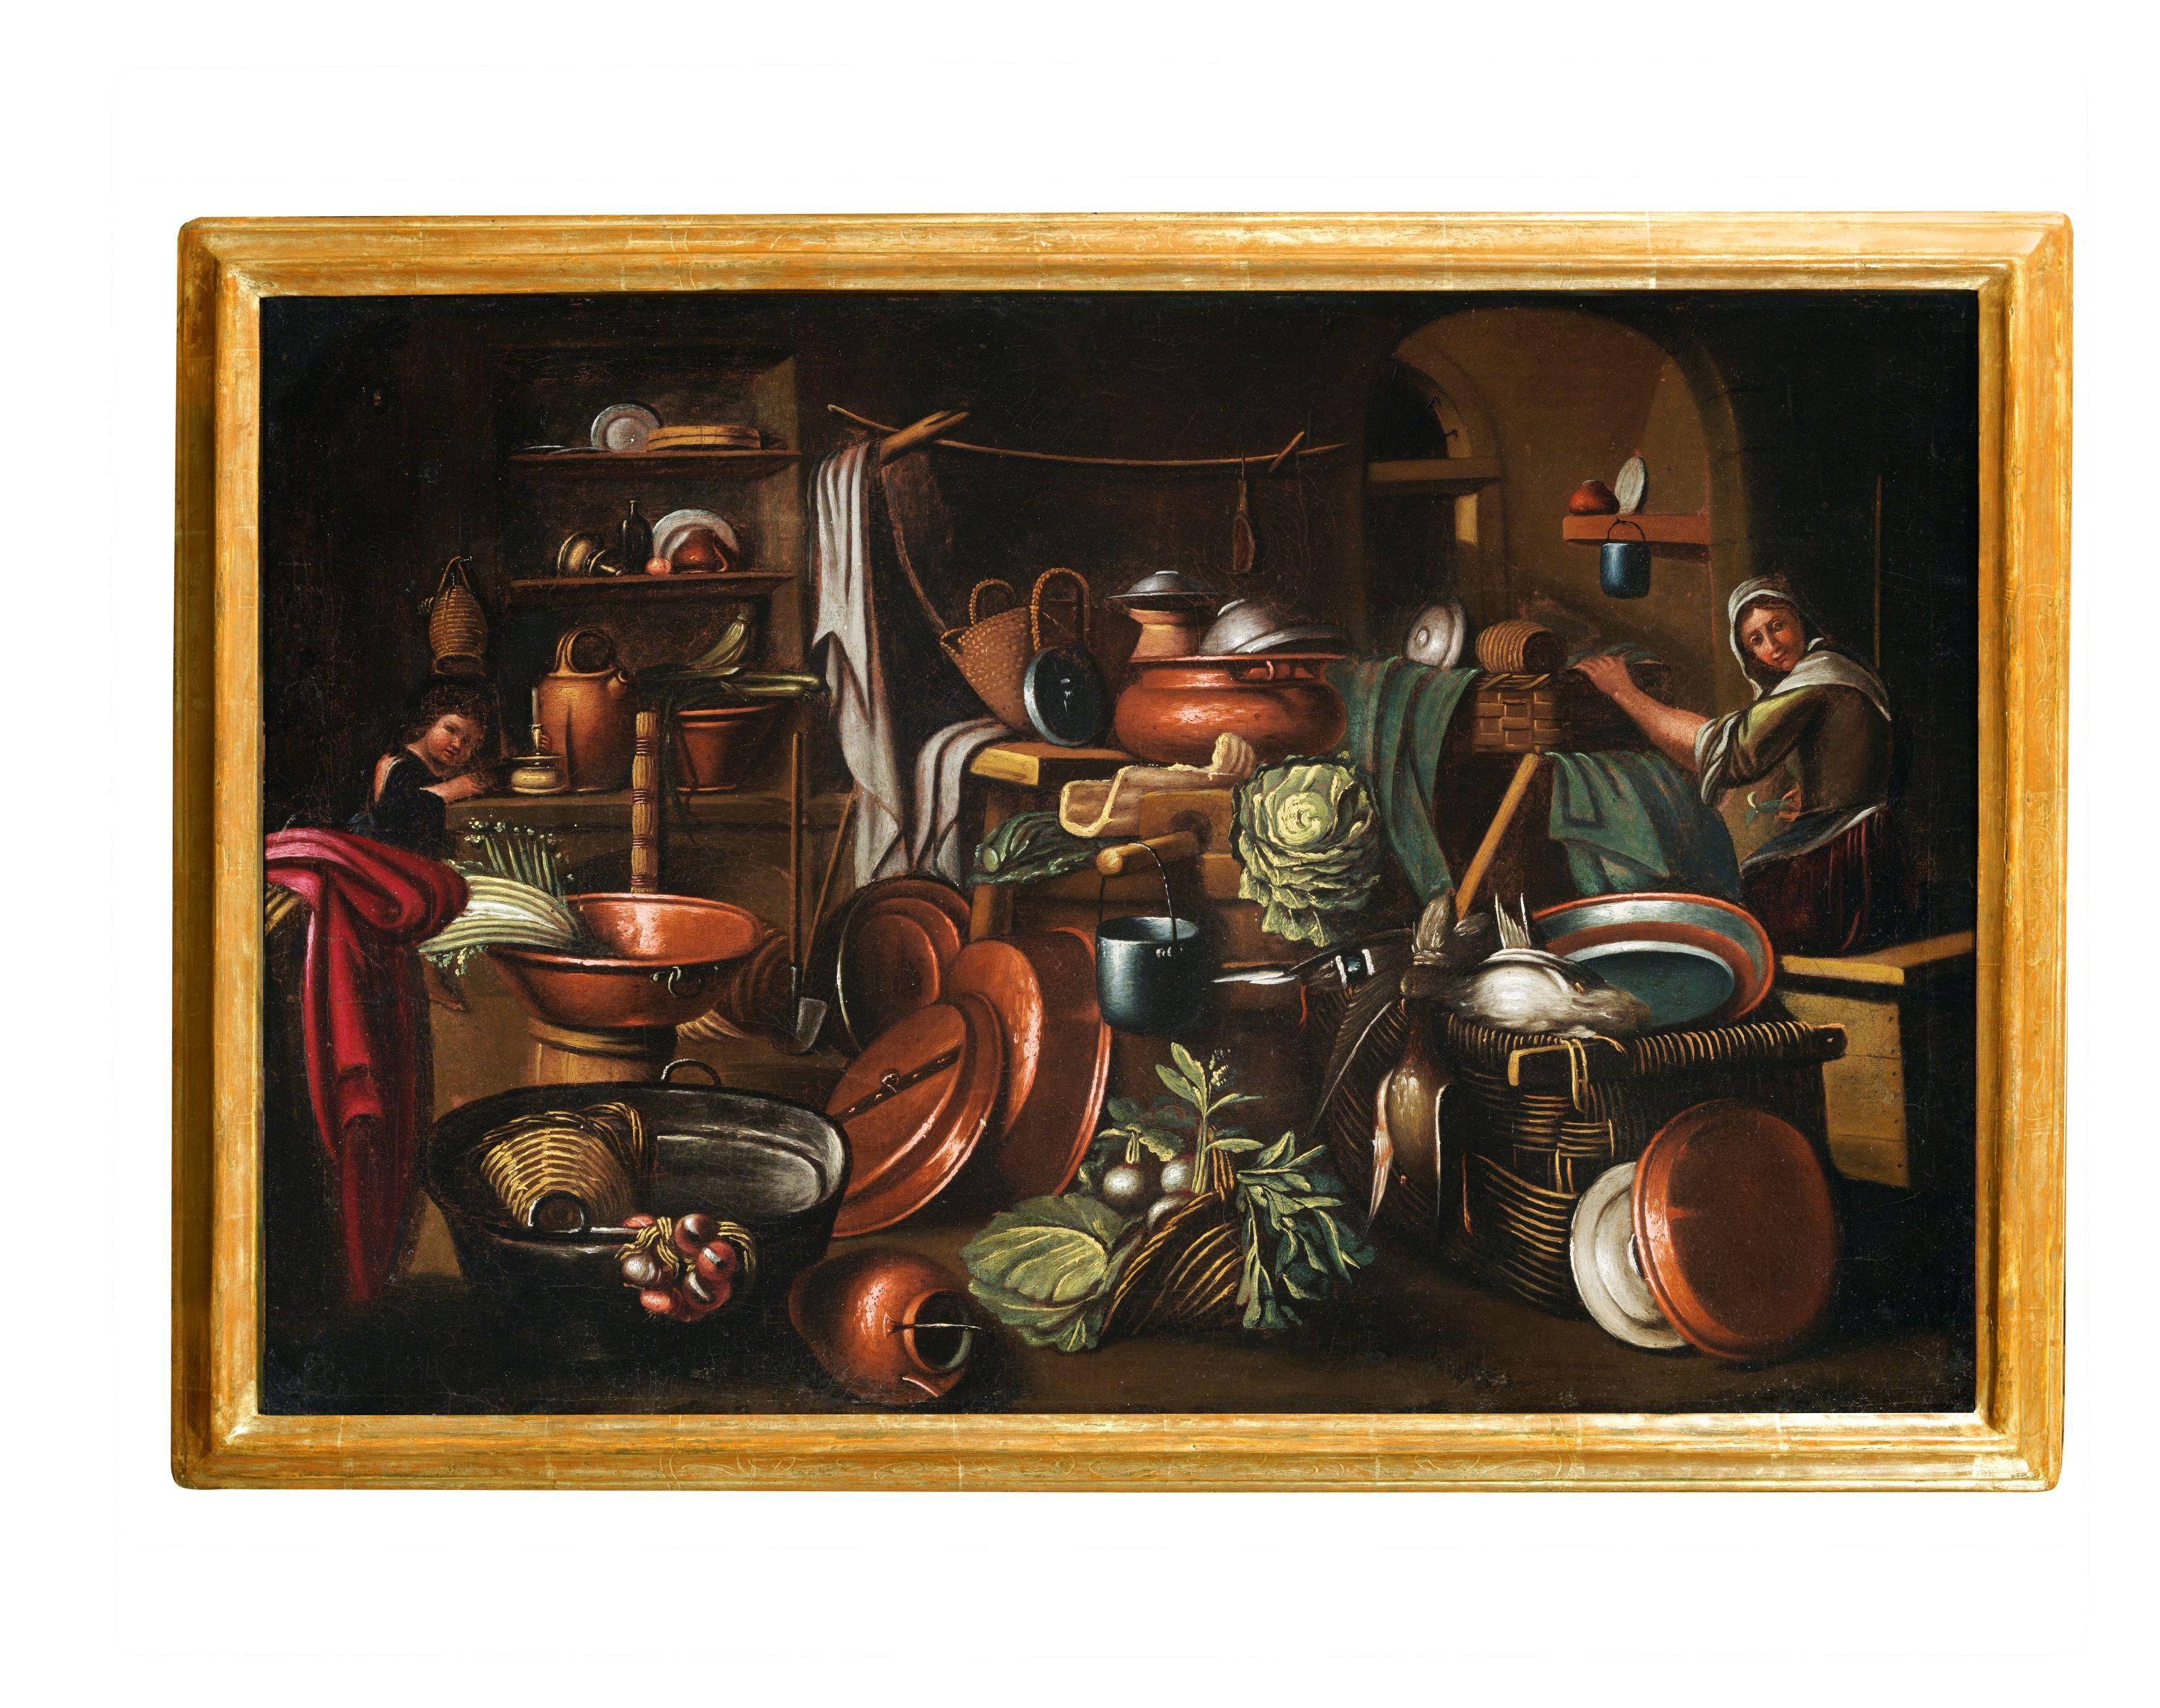 Pair of paintings, oil on canvas measuring 48 x 73 cm without frame and 58 x 83 with frame, depicting two curious kitchen interiors by painter Antonio Crespi ( Bologna 1704 - 1781 ).

The paintings we are examining are shining examples of